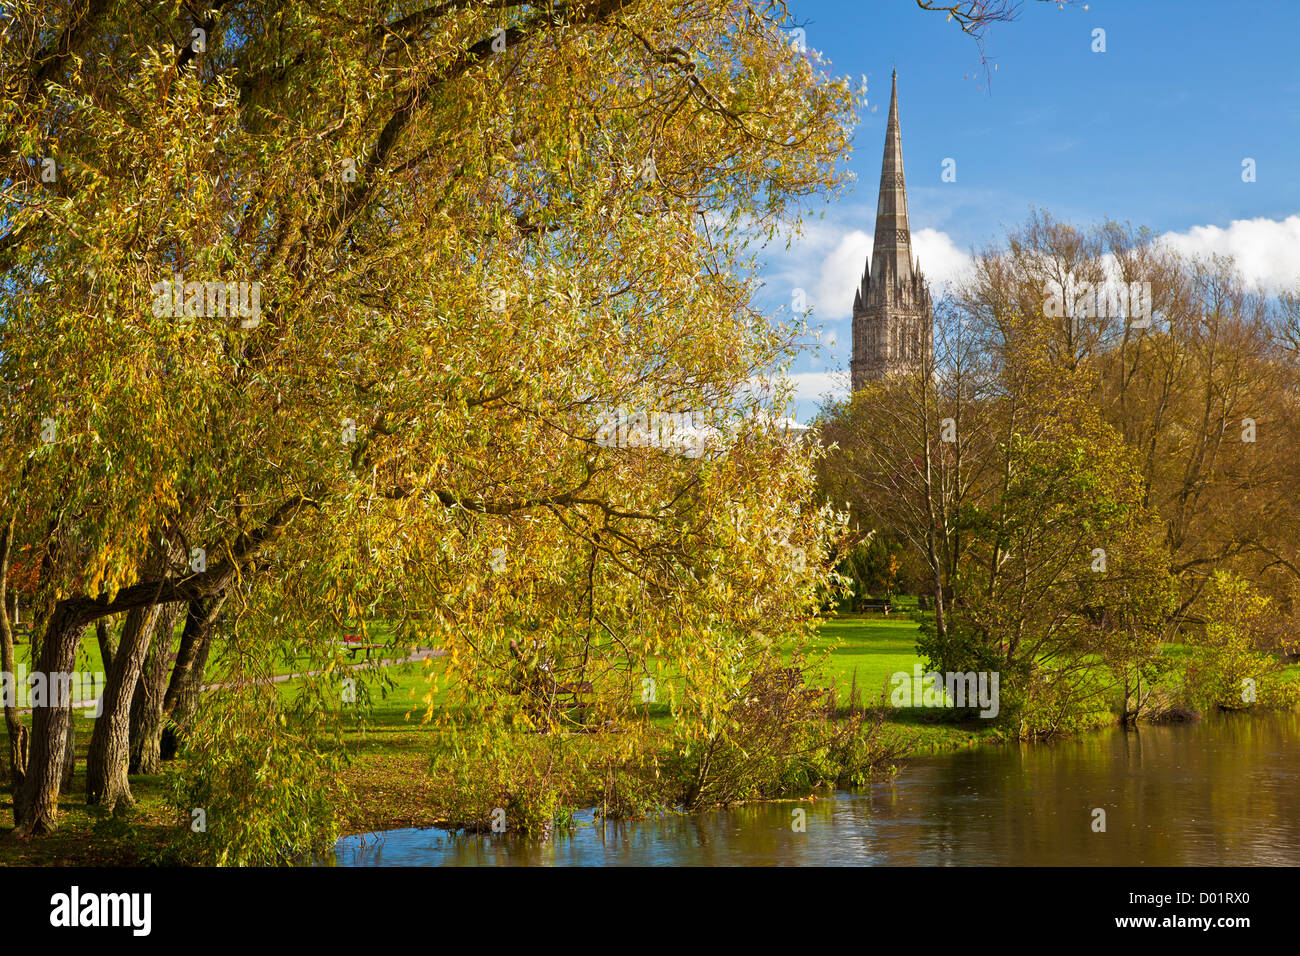 An autumn view of the spire of medieval Salisbury Cathedral, Wiltshire, England, UK with the River Avon in the foreground. Stock Photo